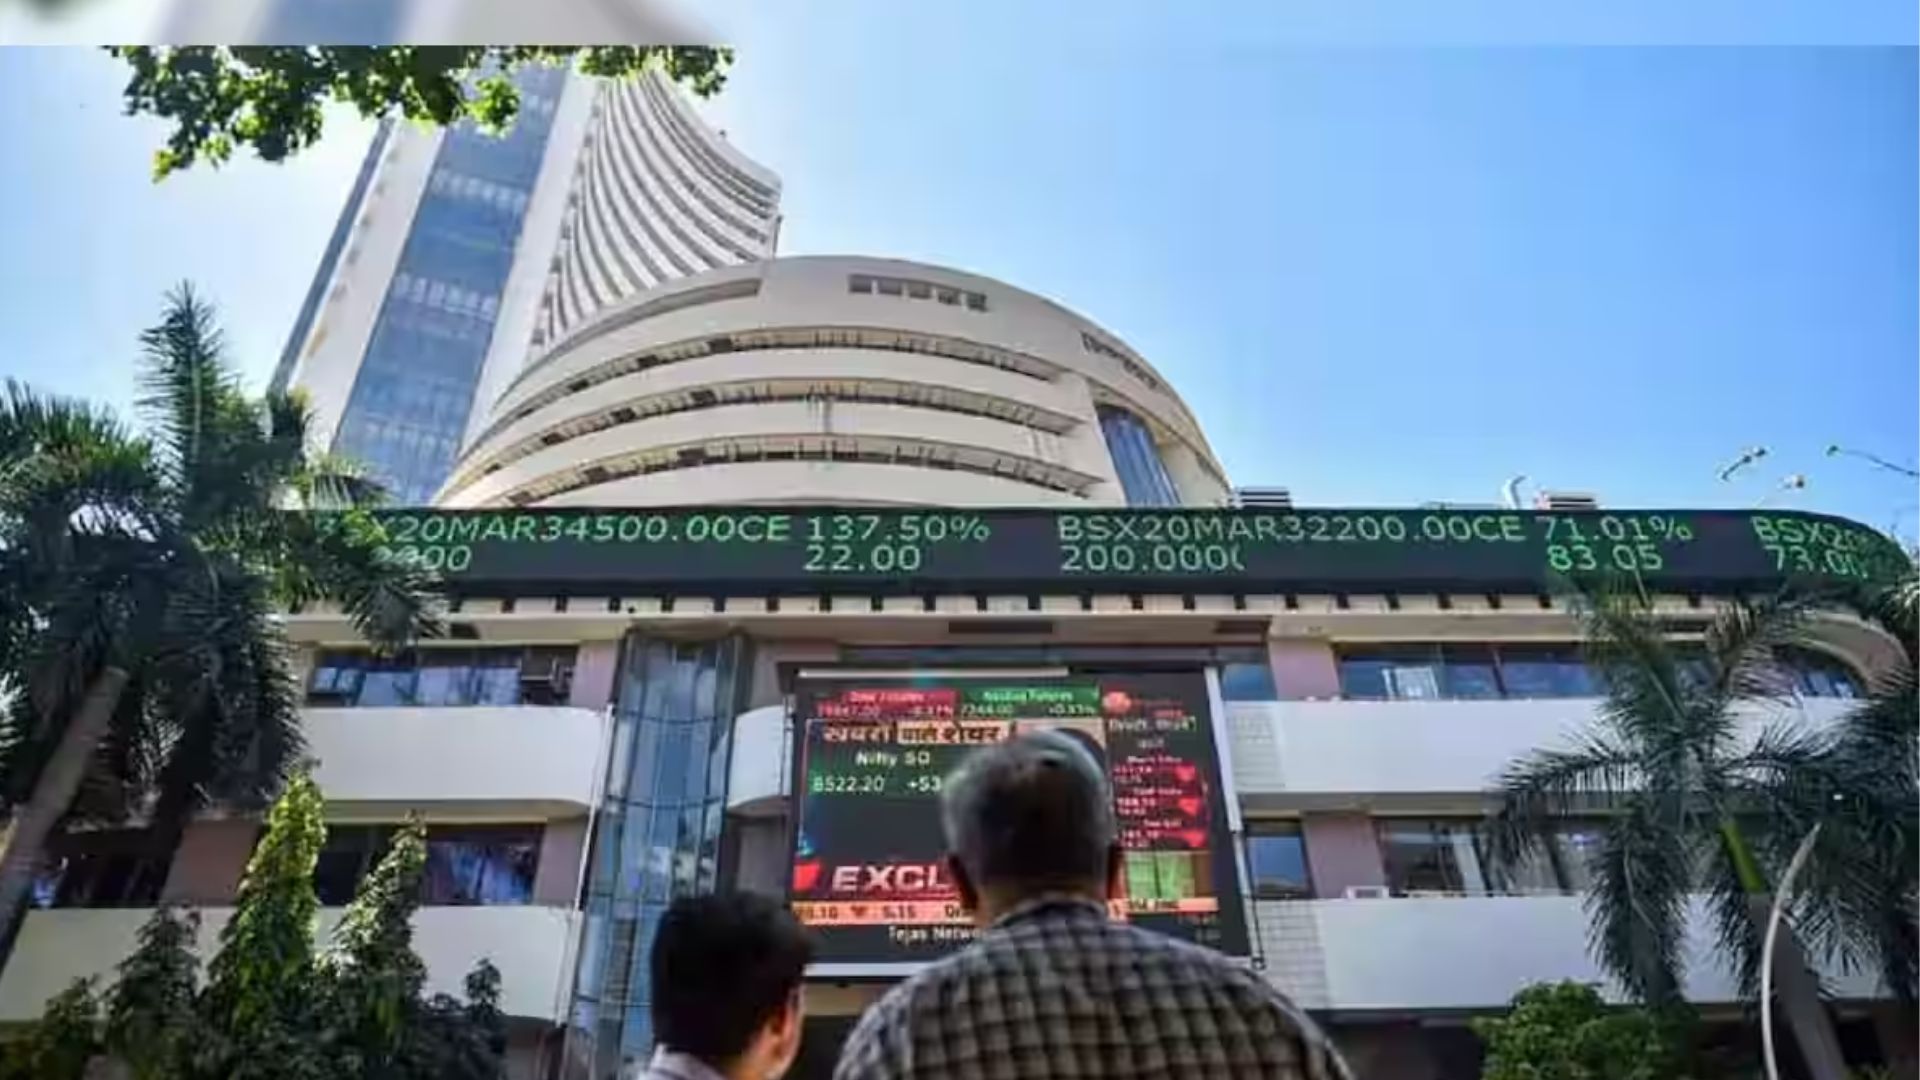 Indian stocks firm on Q2 GDP numbers, Nifty reaching a record high